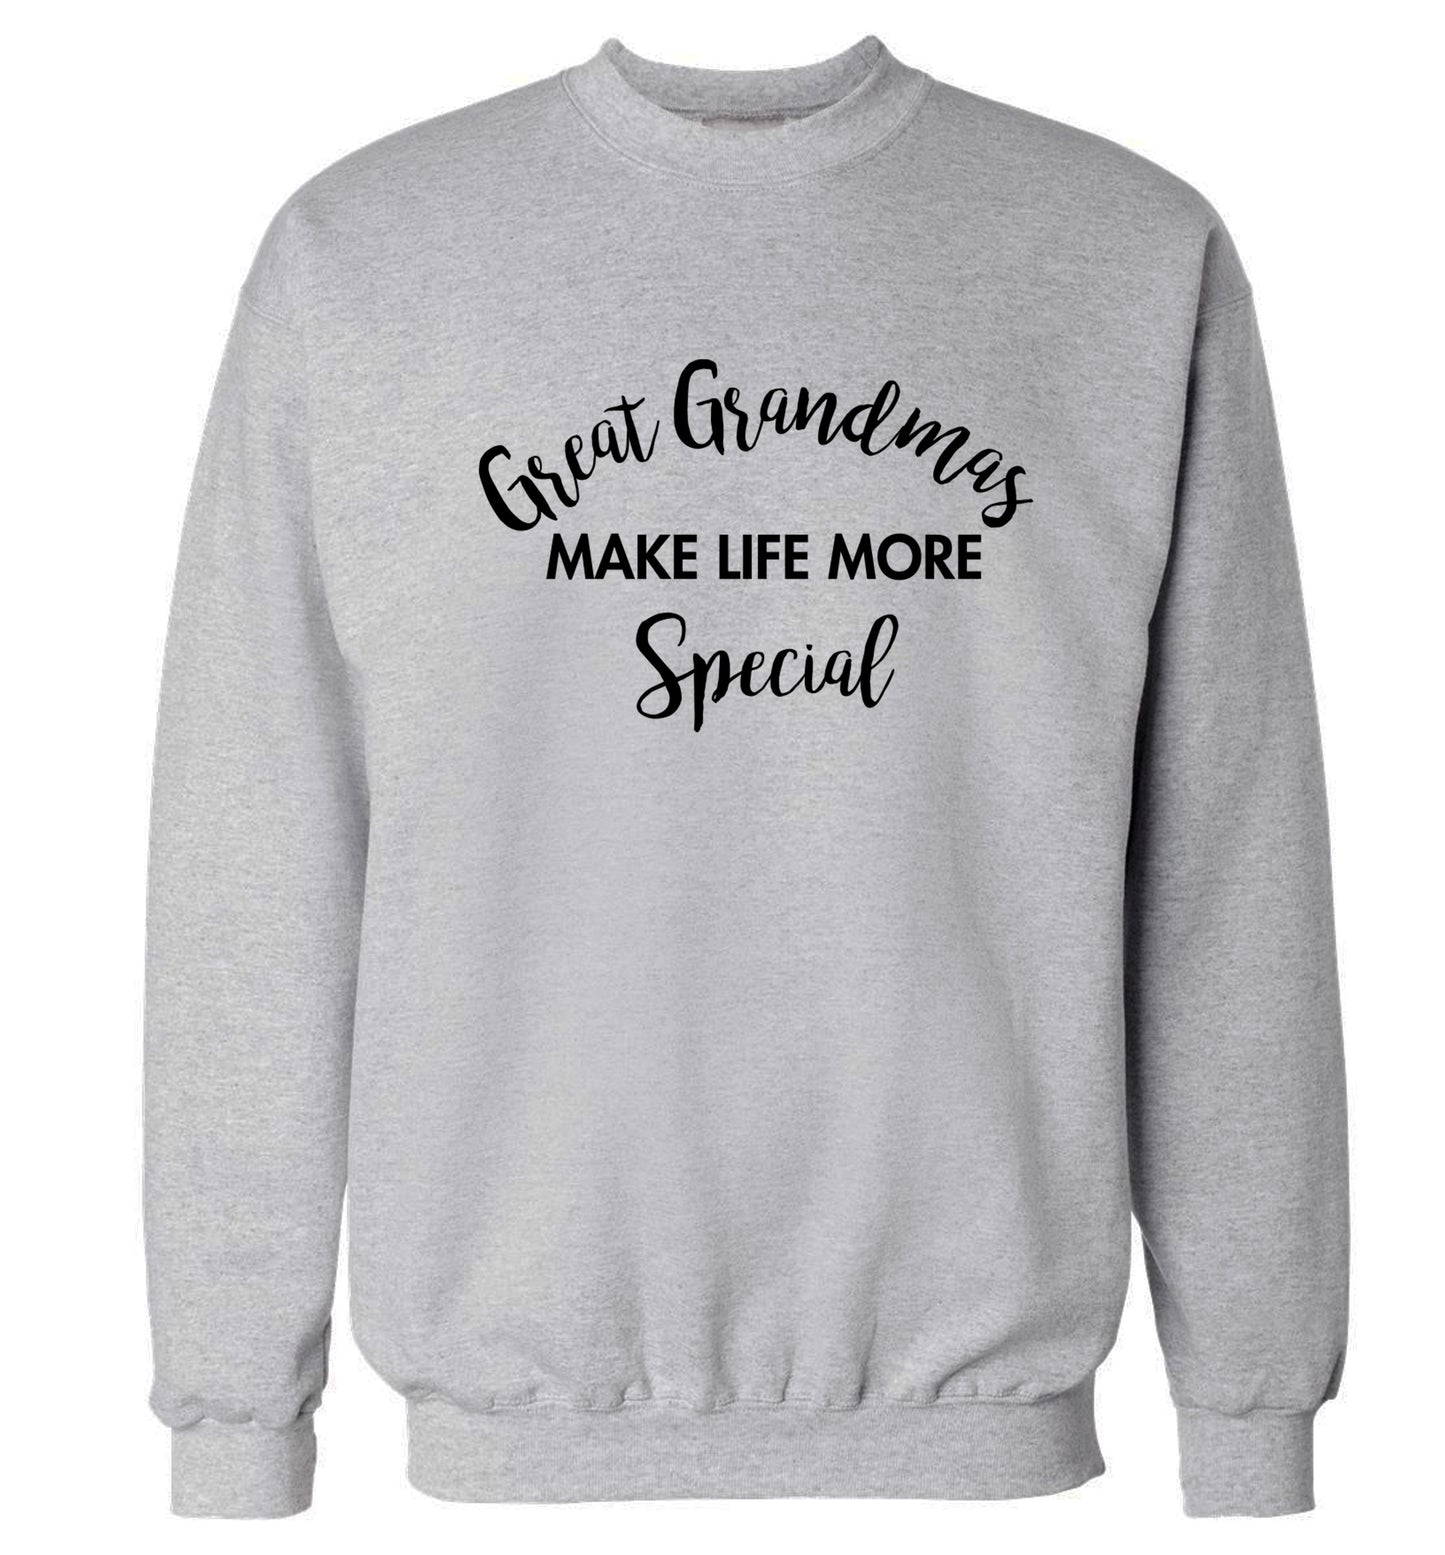 Great Grandmas make life more special Adult's unisex grey Sweater 2XL